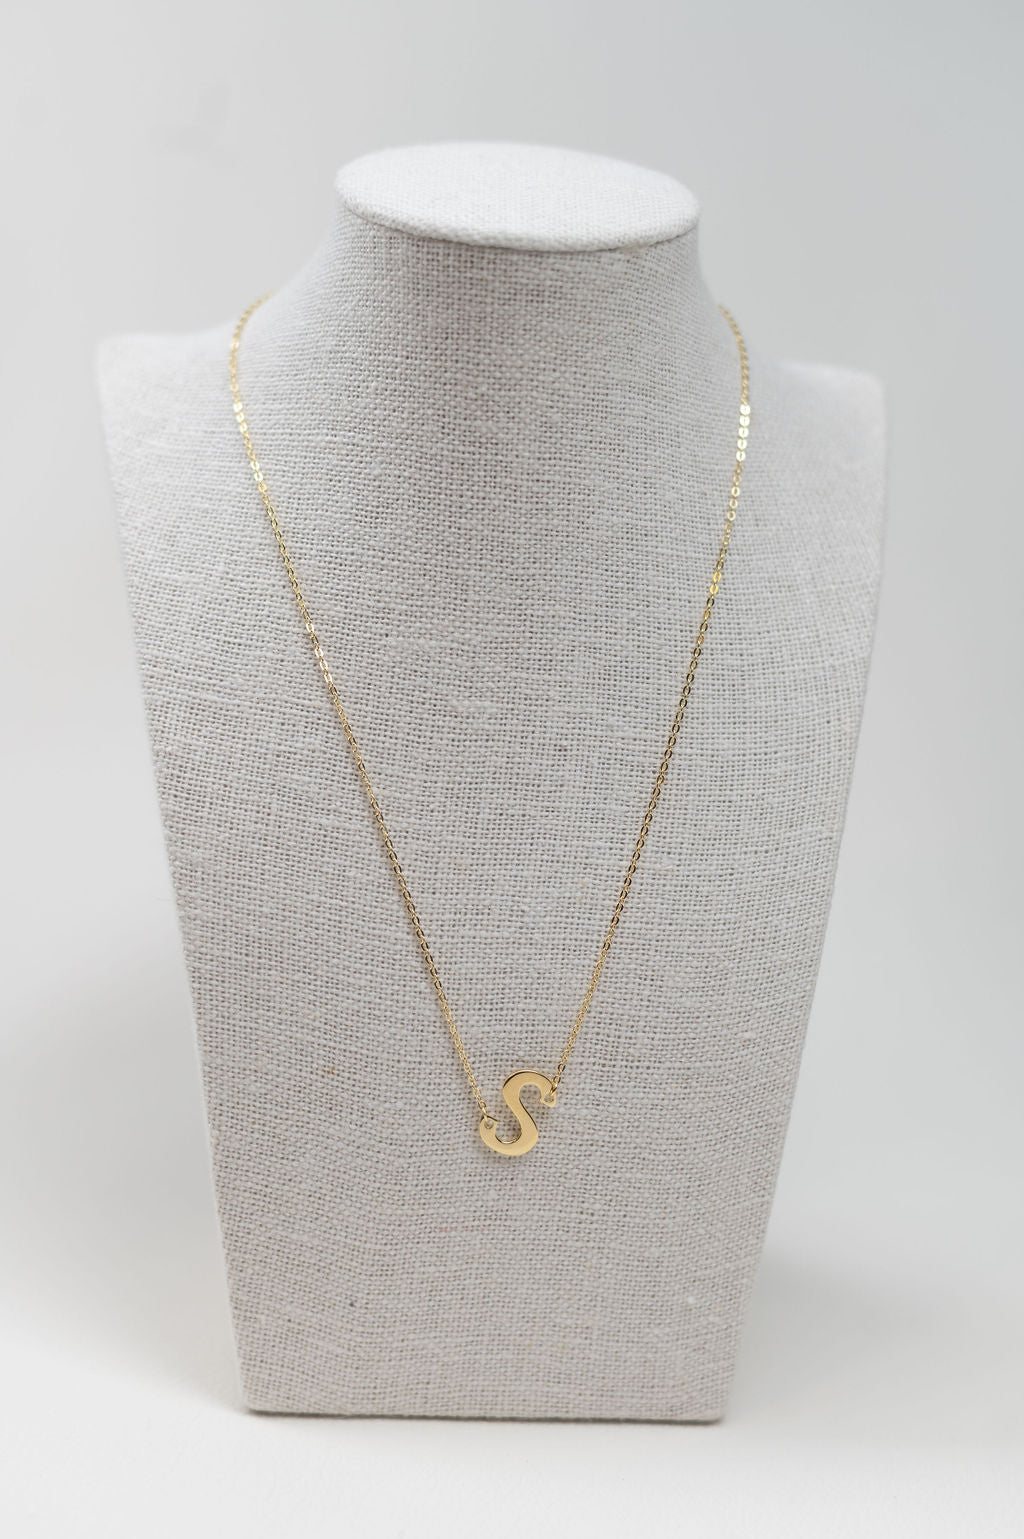 The Company 'Initial Me' Pendant - S